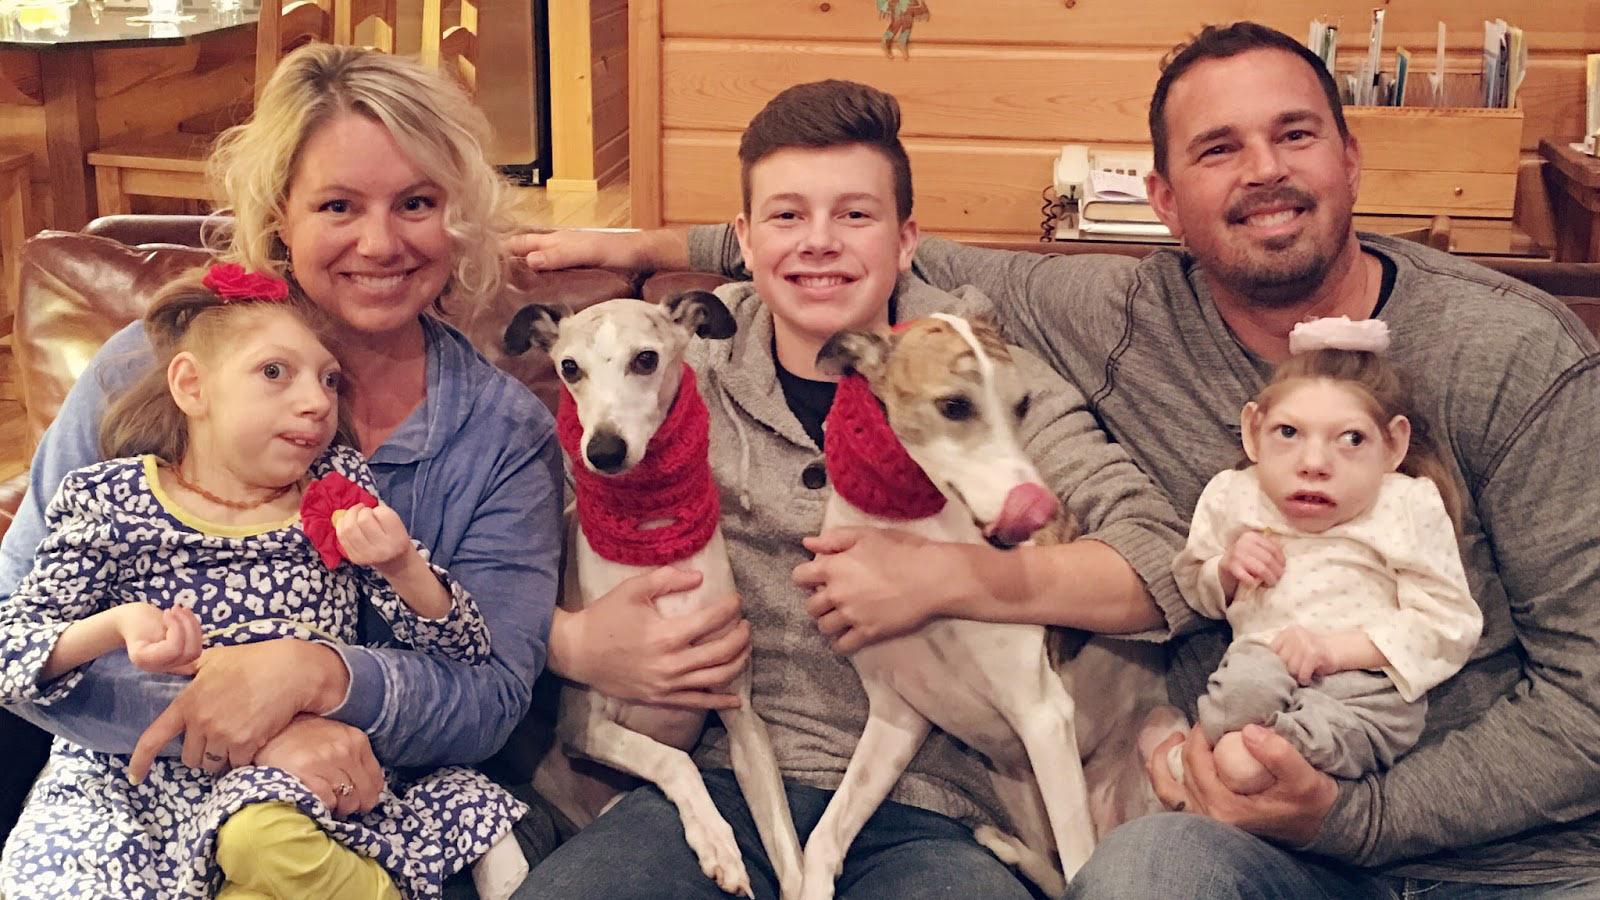 The Hartley family. (Left to right) Gwen holding Claire (age 14); Cal (age 17); Scott holding Lola (age 9); and their two whippets, Romeo and Cash.